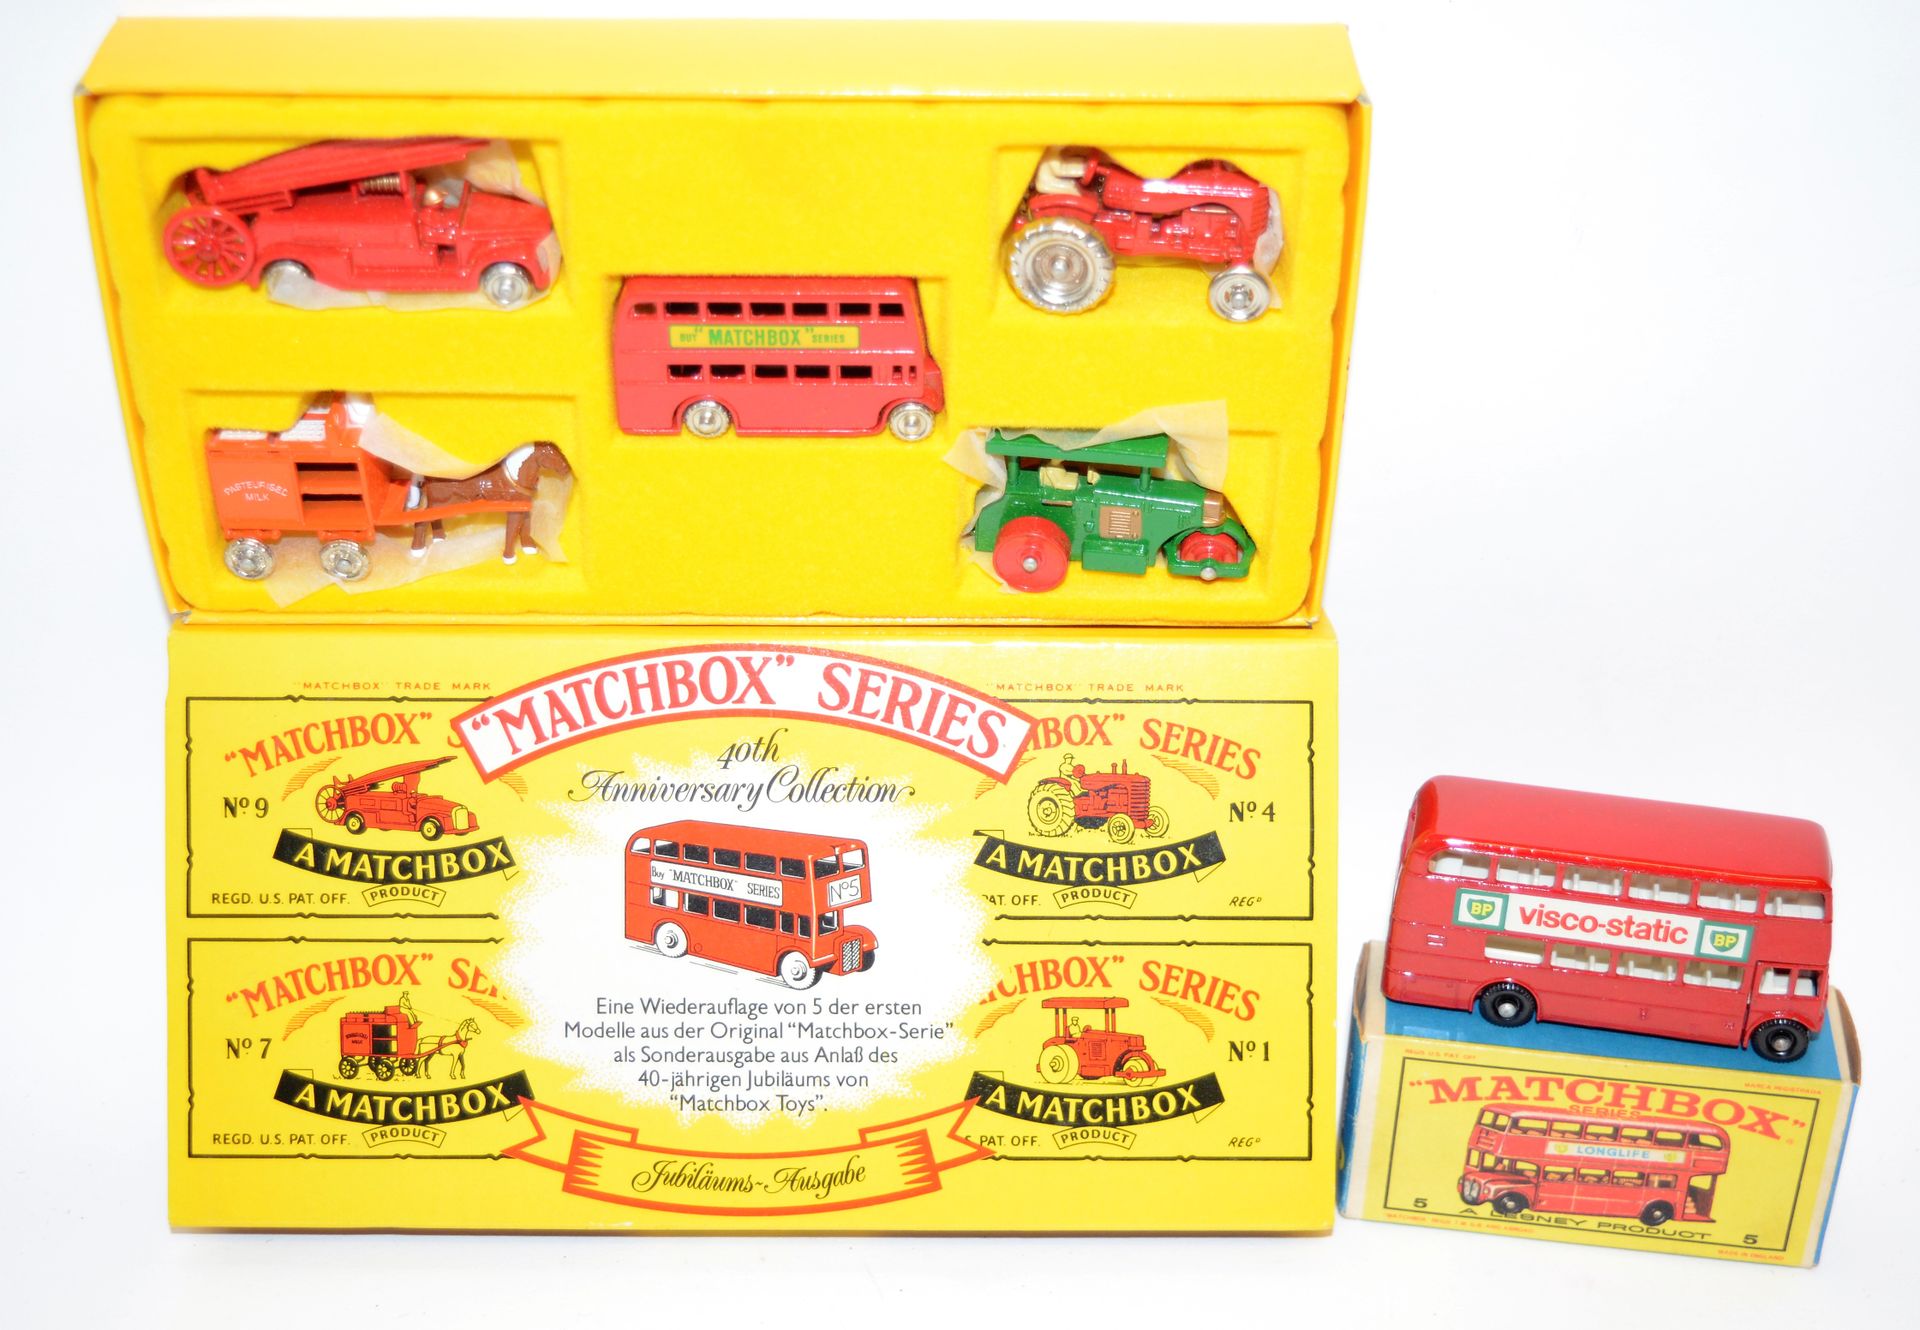 Null MATCHBOX "Series": 2 boxes

-1 box 40th anniversary including 5 vehicles (B&hellip;